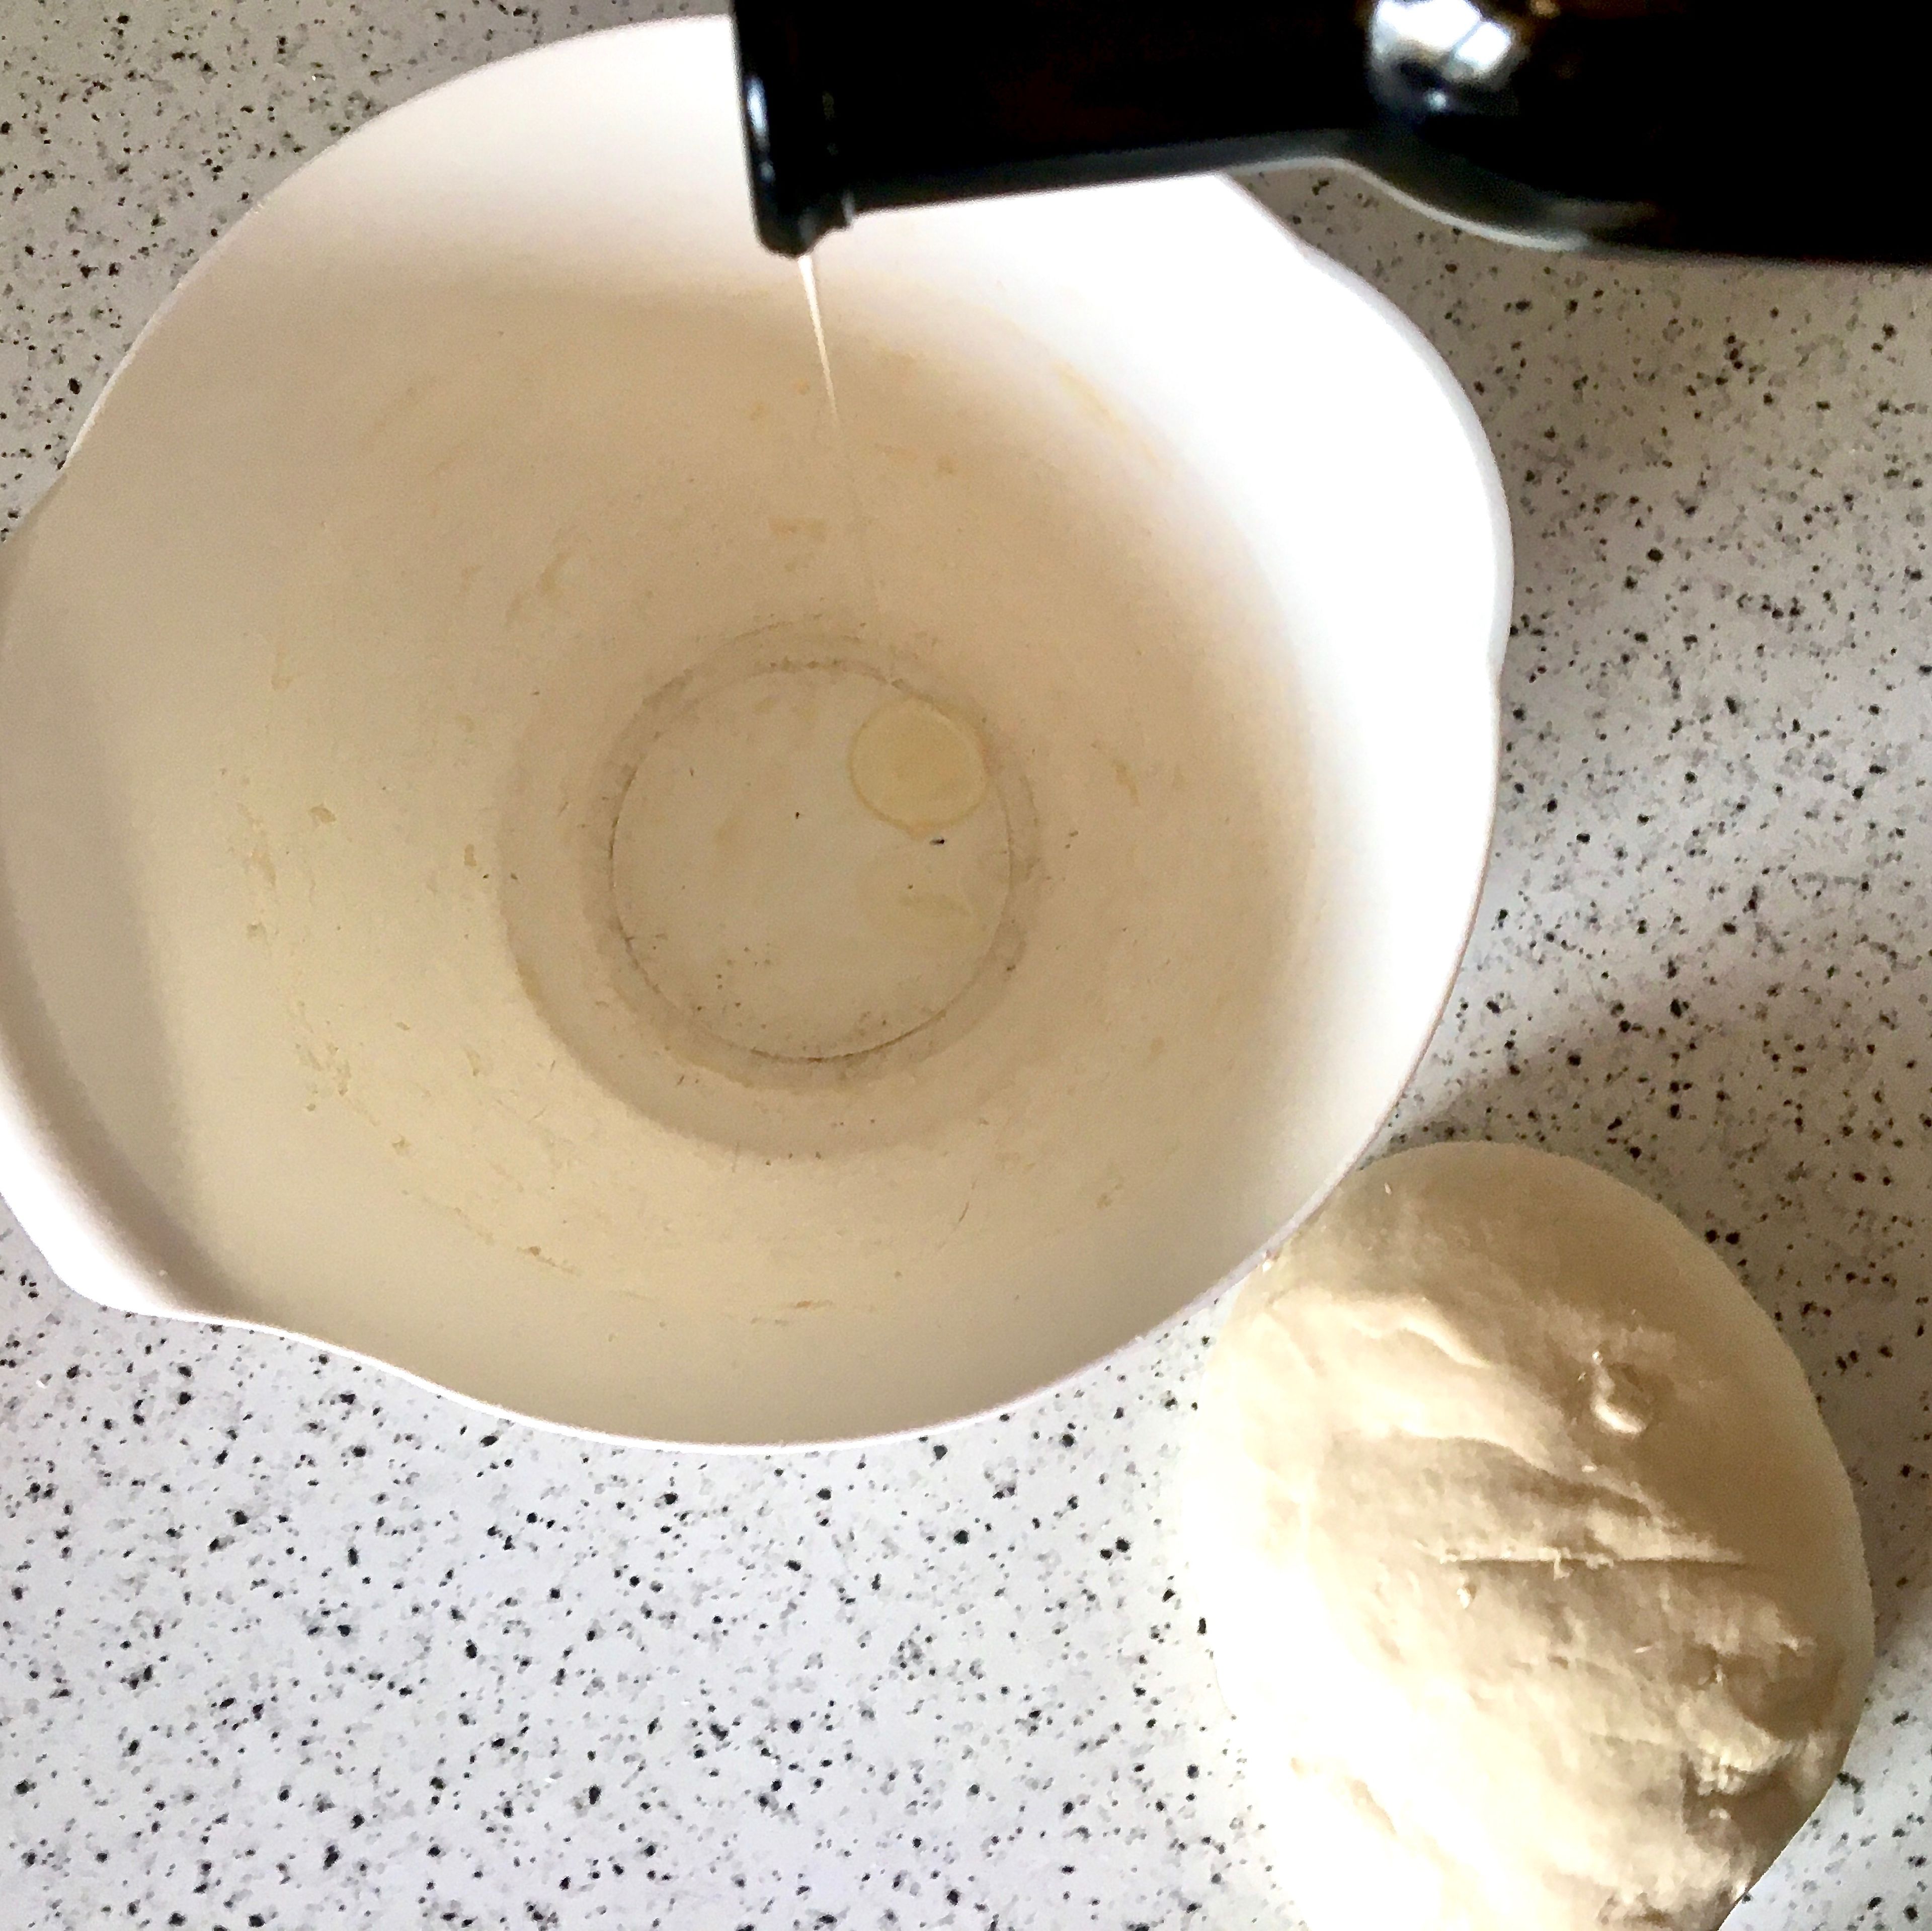 Drop a little oil in the bowl and swirl around to coat the bottom. Shape the dough into a ball and place in the oiled bowl. Cover with a damp kitchen towel and let rise until doubled in size, about 4 hours.